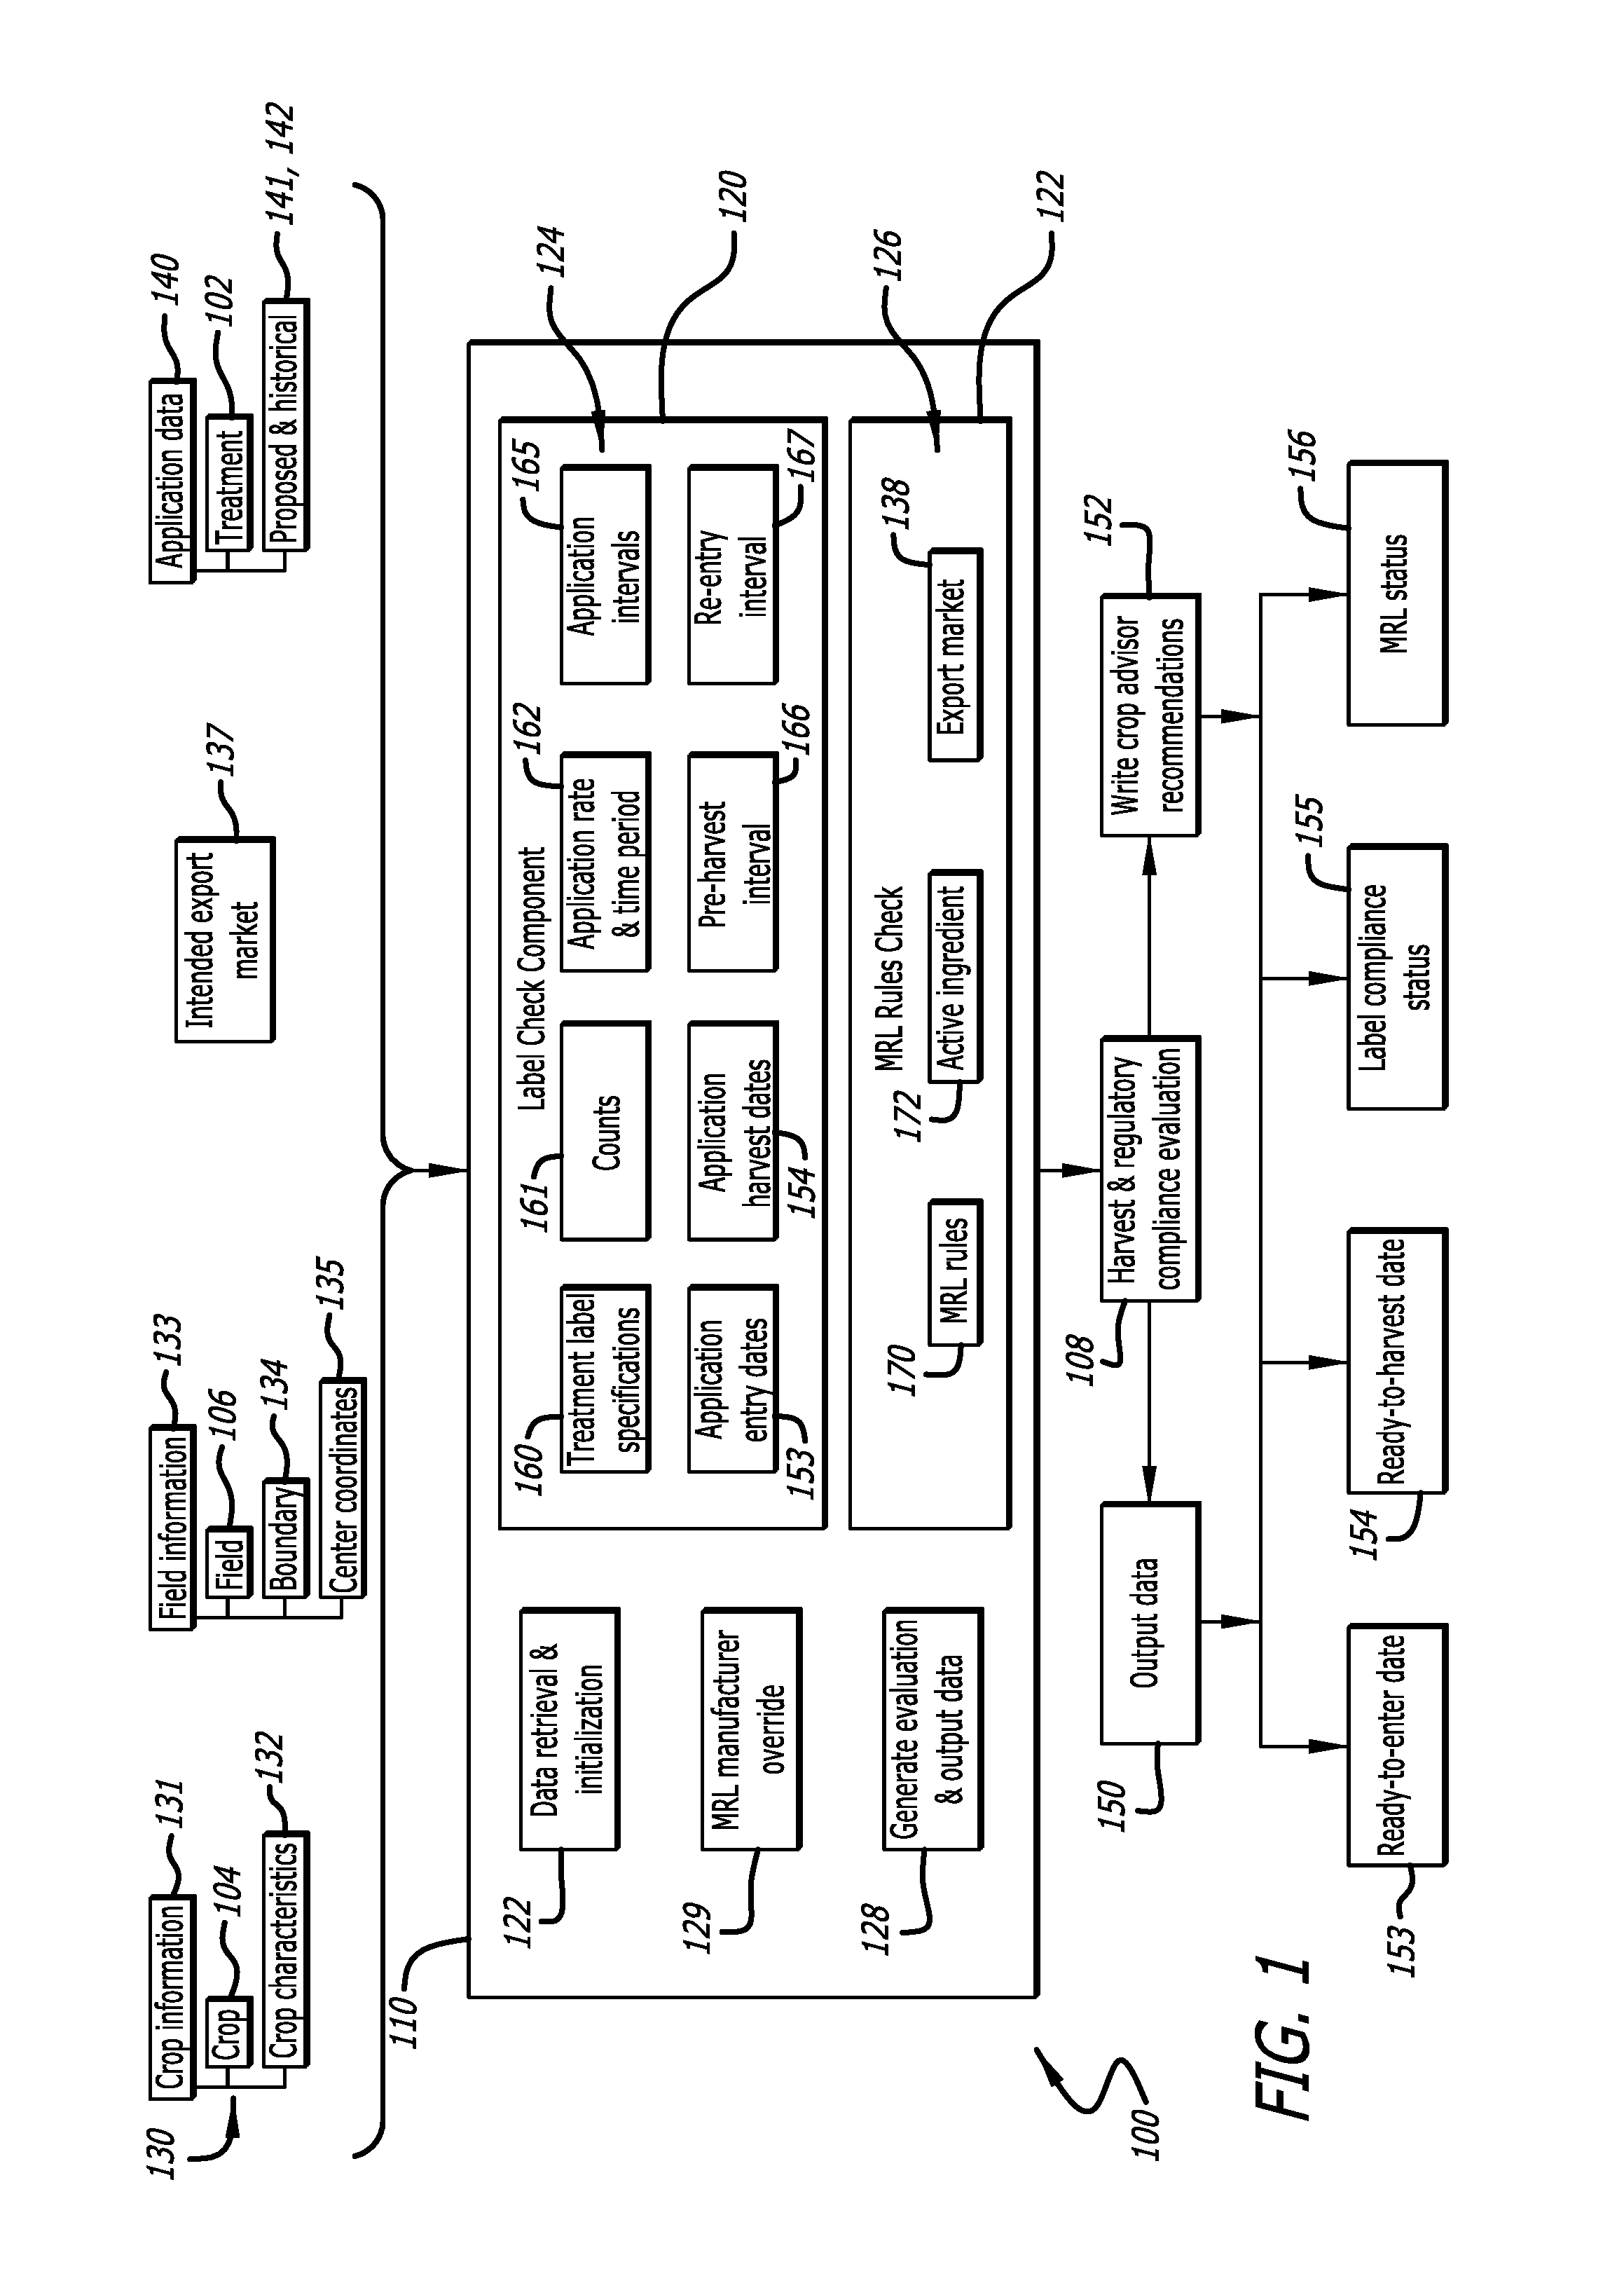 Pesticide and crop treatment application label and maximum residue level compliance checking system and method